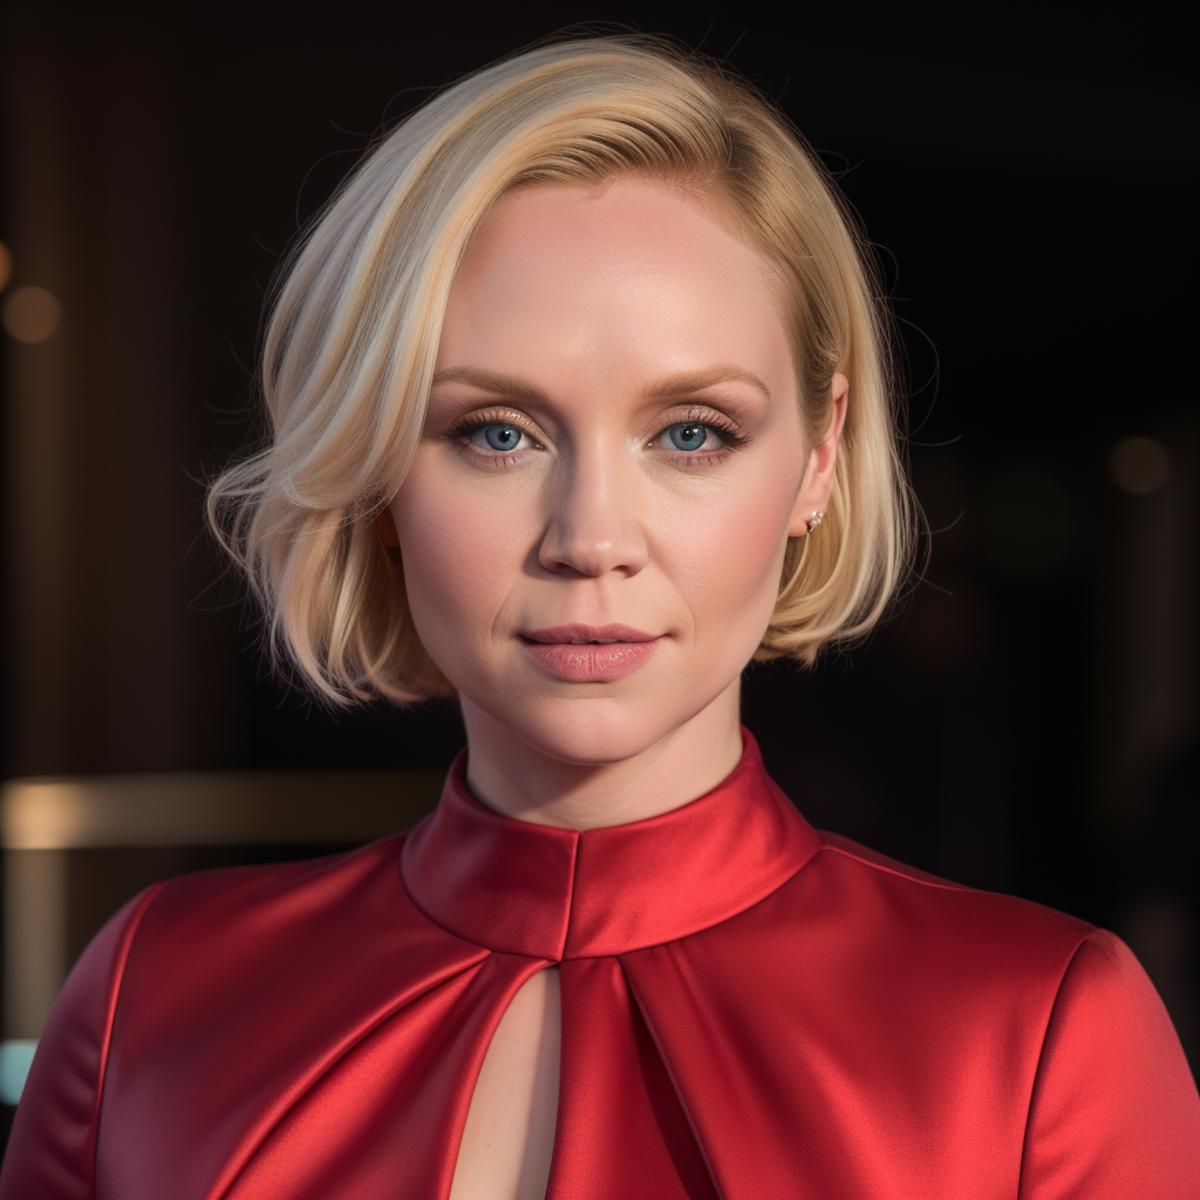 Gwendoline Christie image by infamous__fish